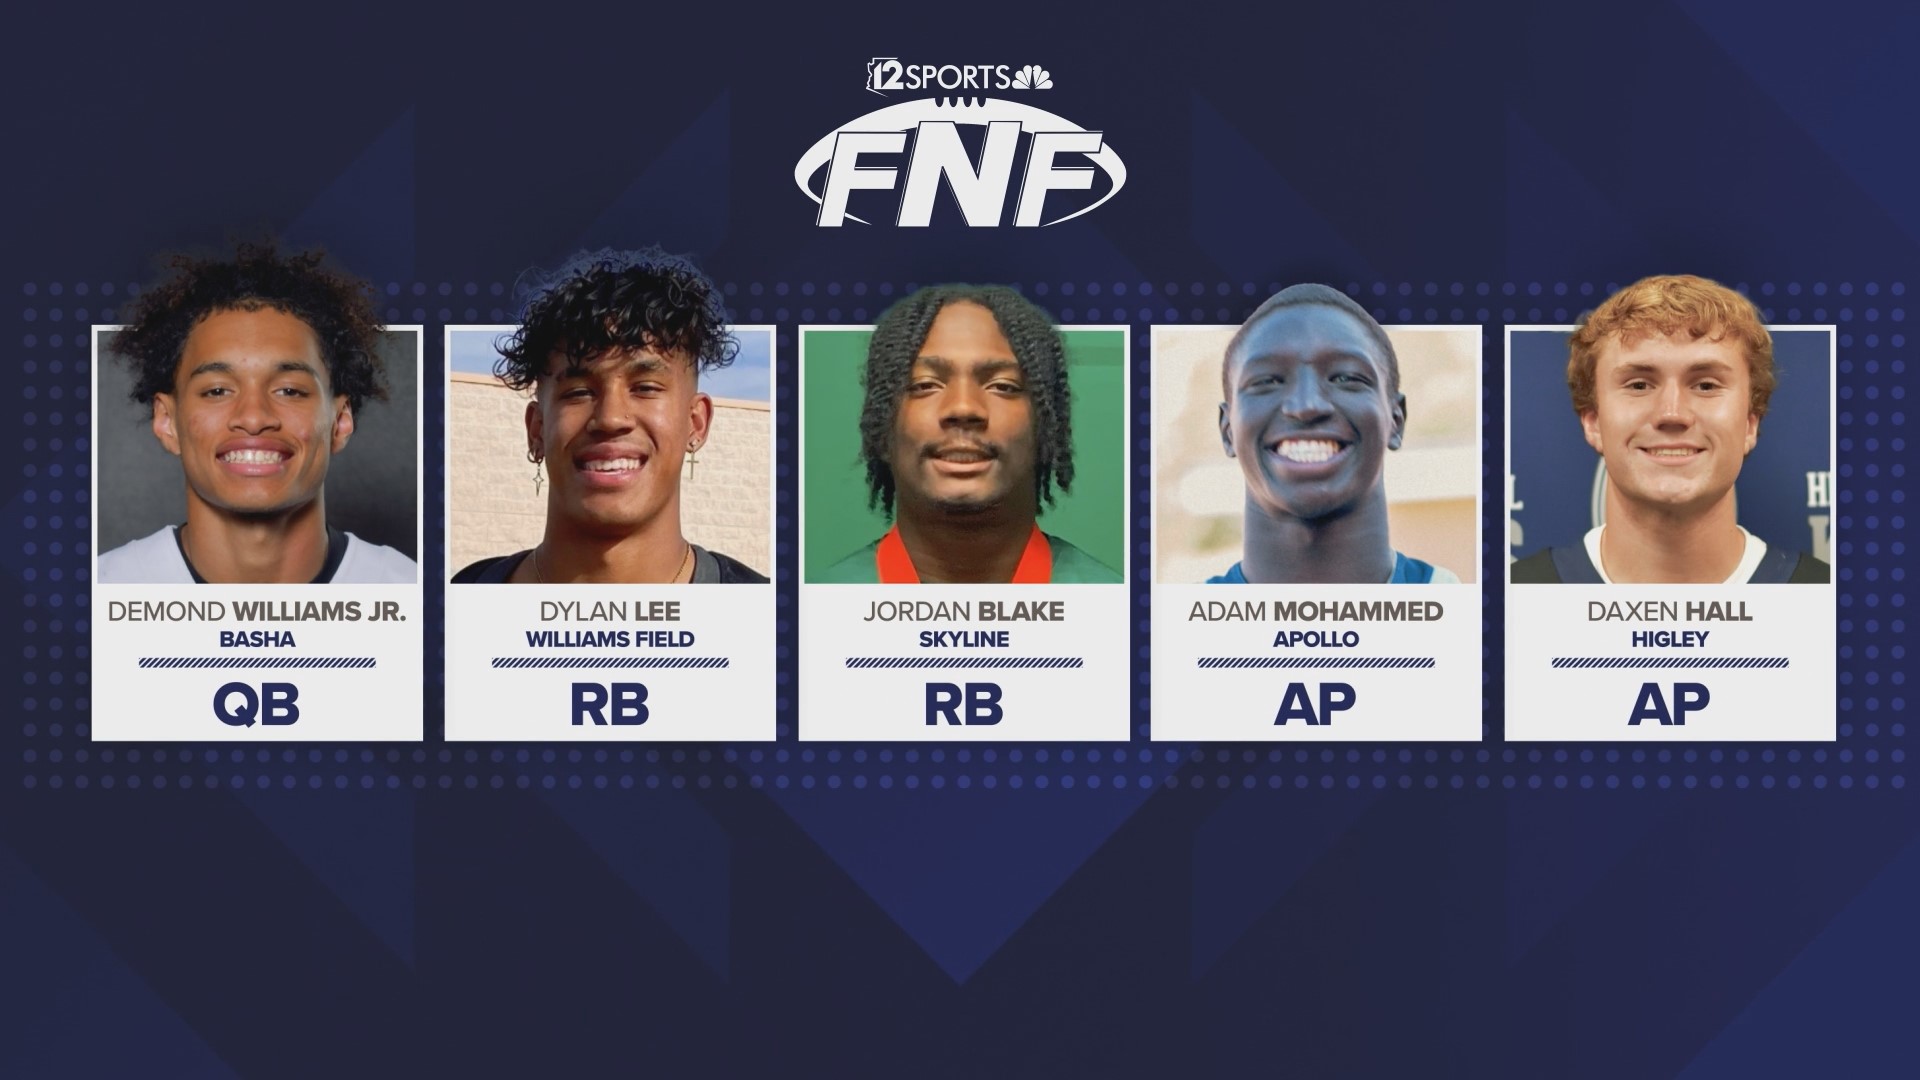 The 2023 All-Fever team has been revealed! Here are the players who made it at Quarterback, Running Back, All-Purpose, Wide Receiver and Tight End